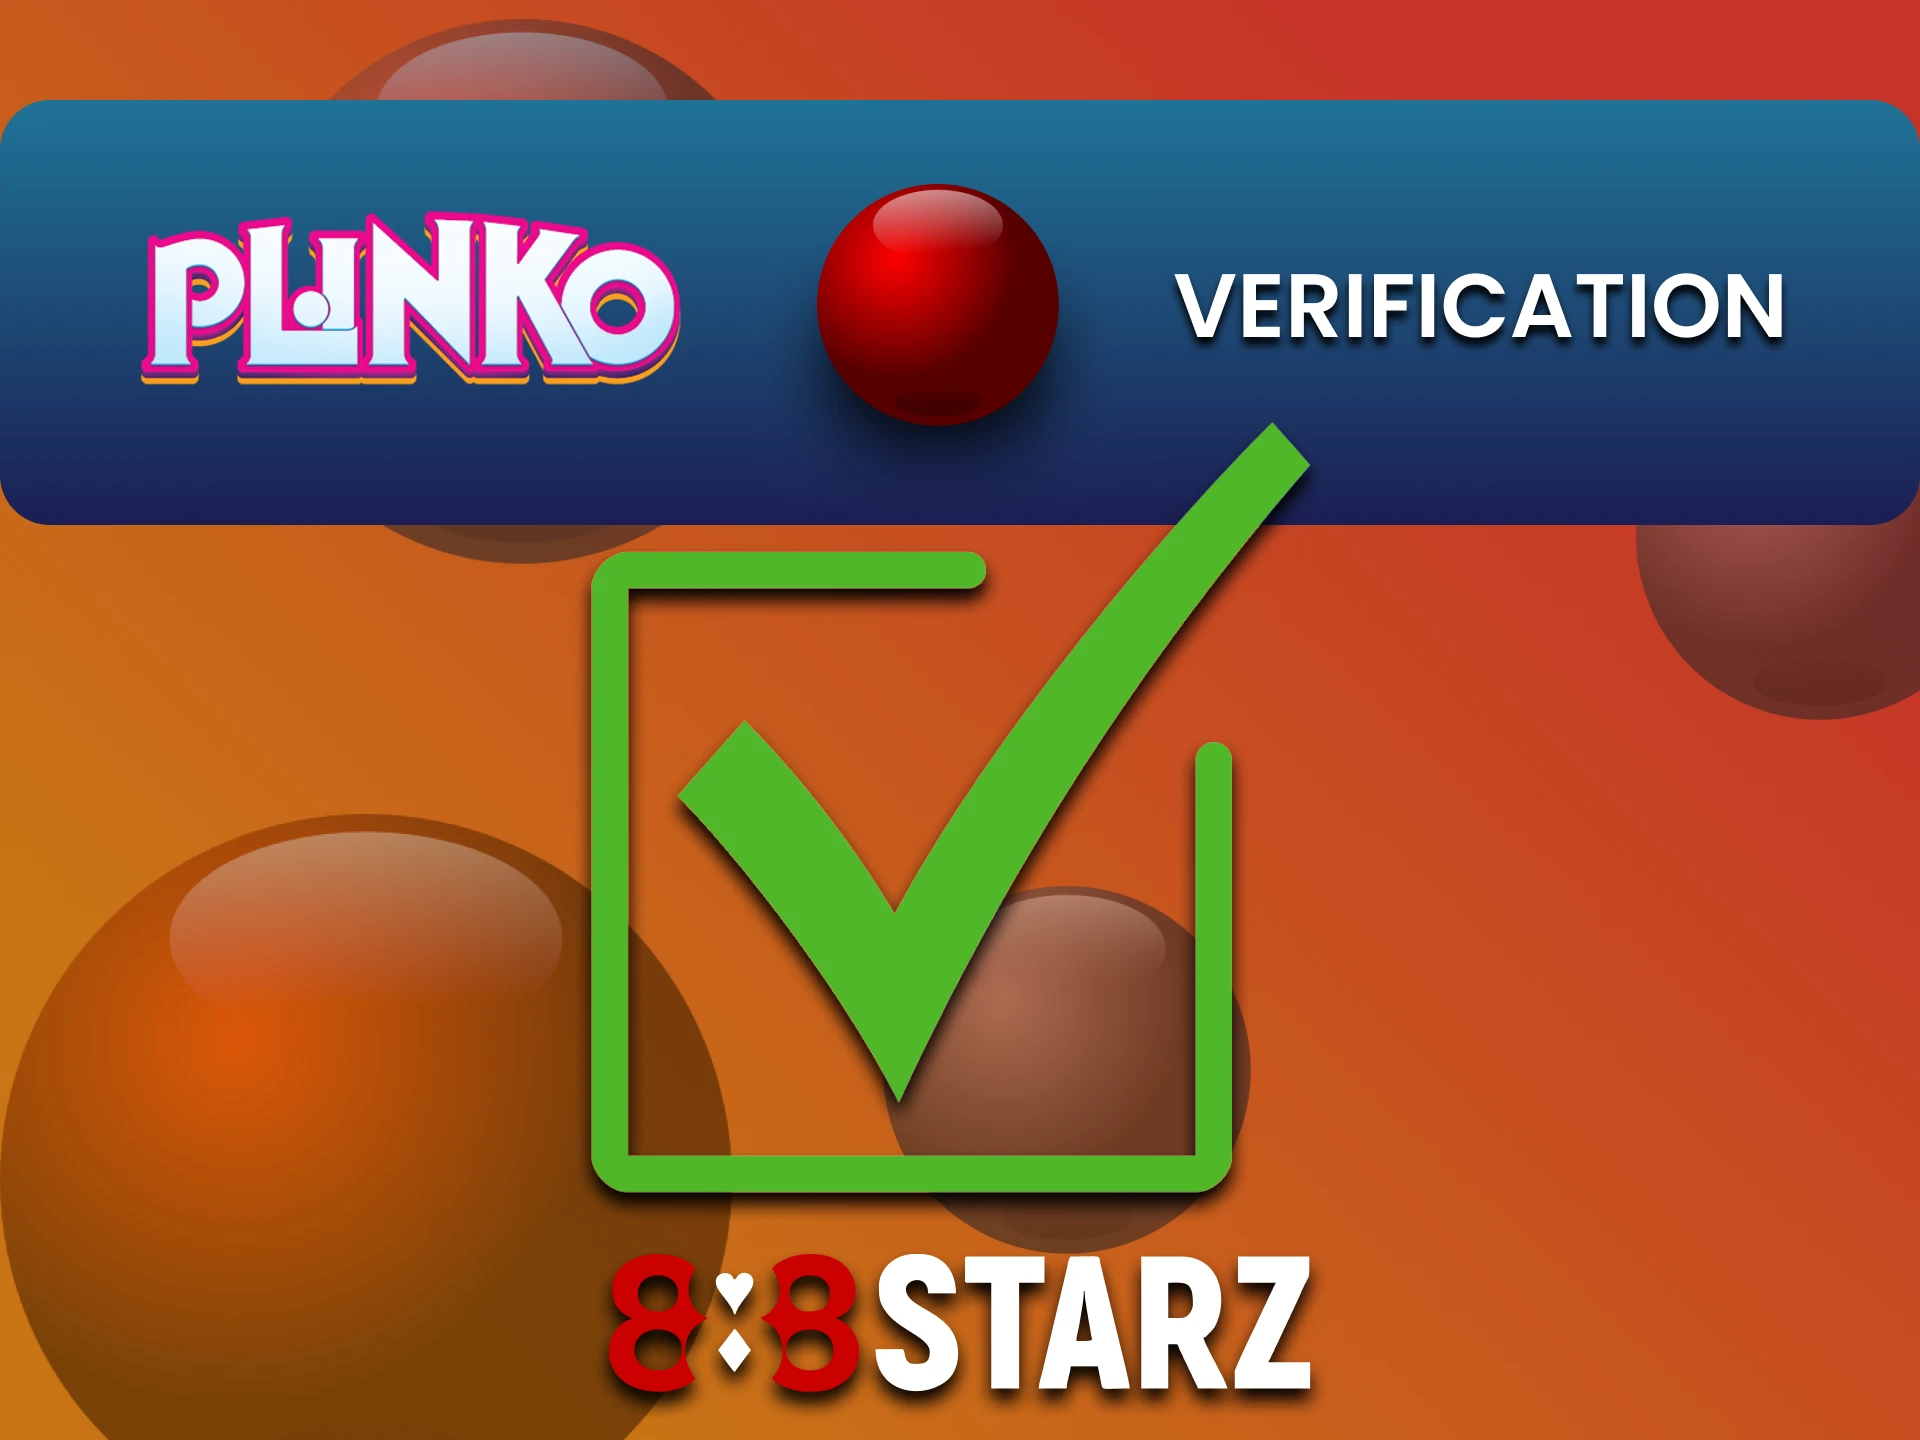 Fill in your account details to play Plinko on 888starz.